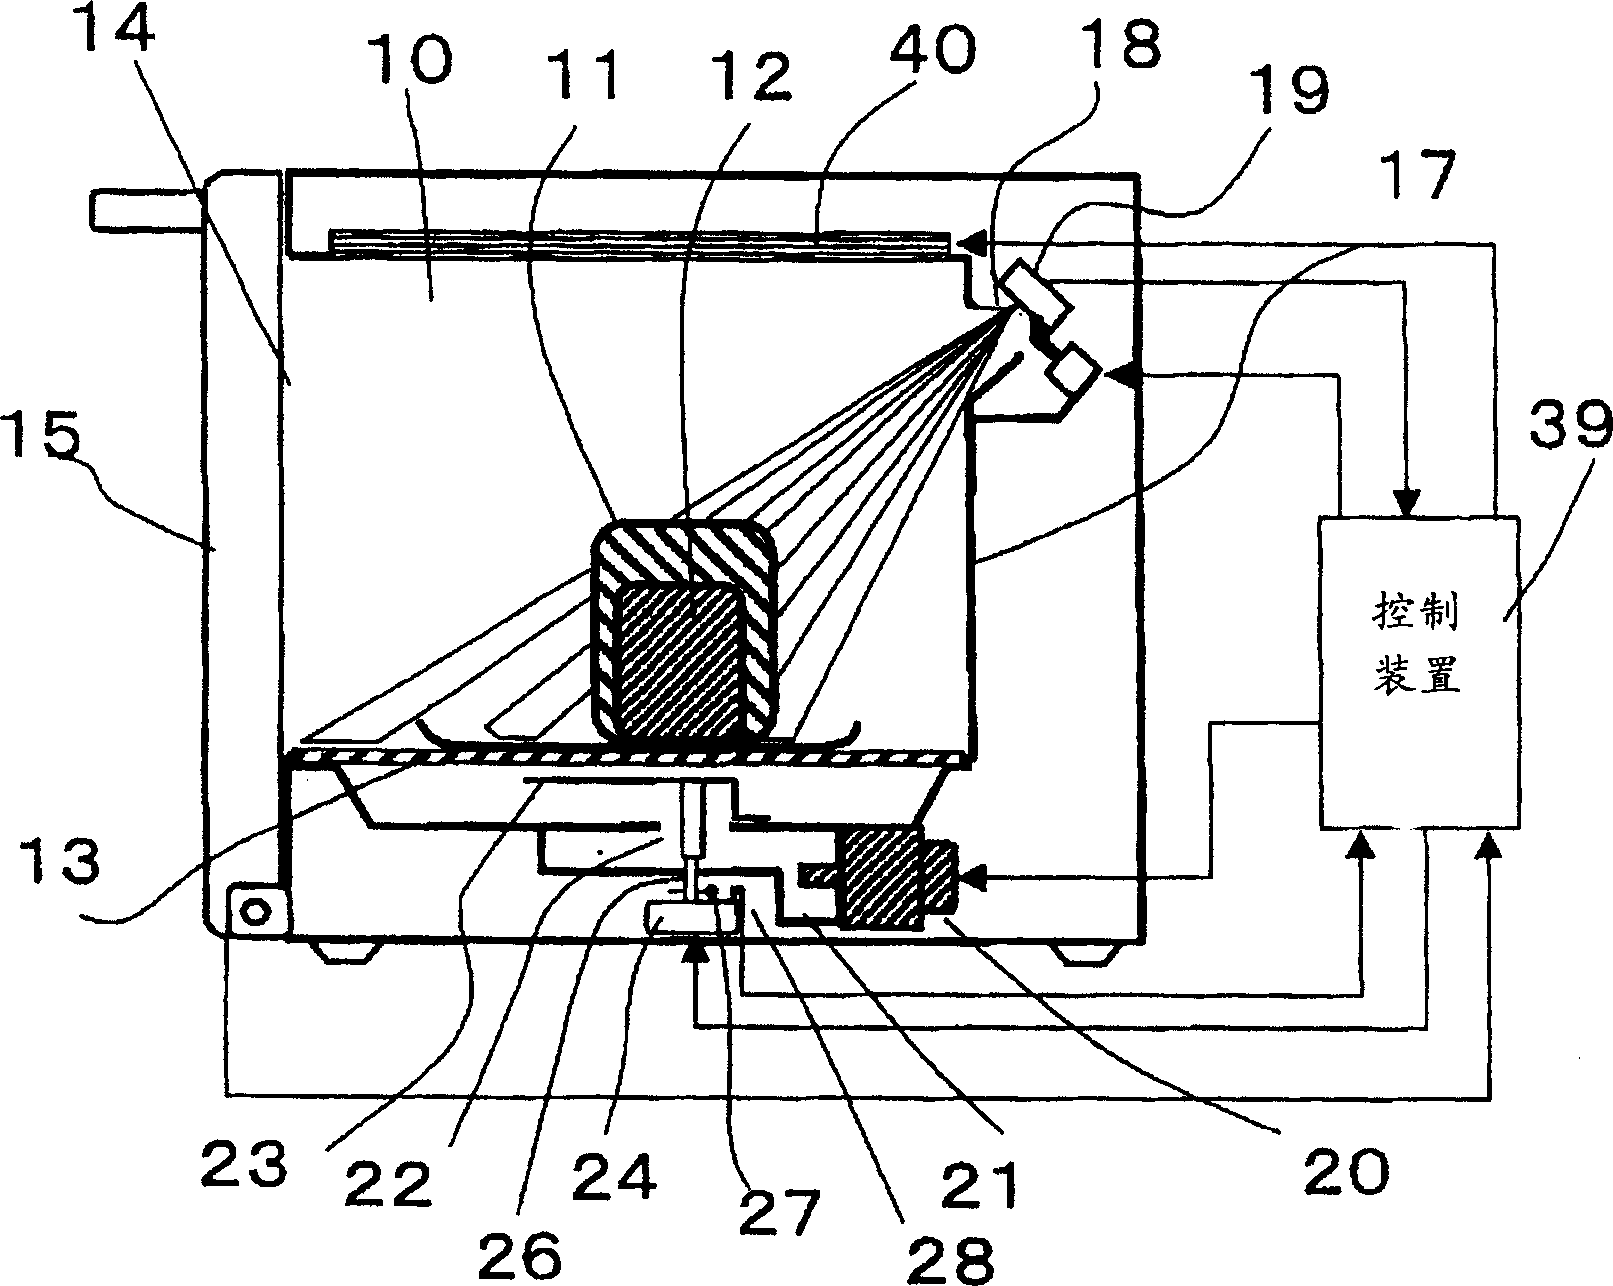 Heating and cooking device